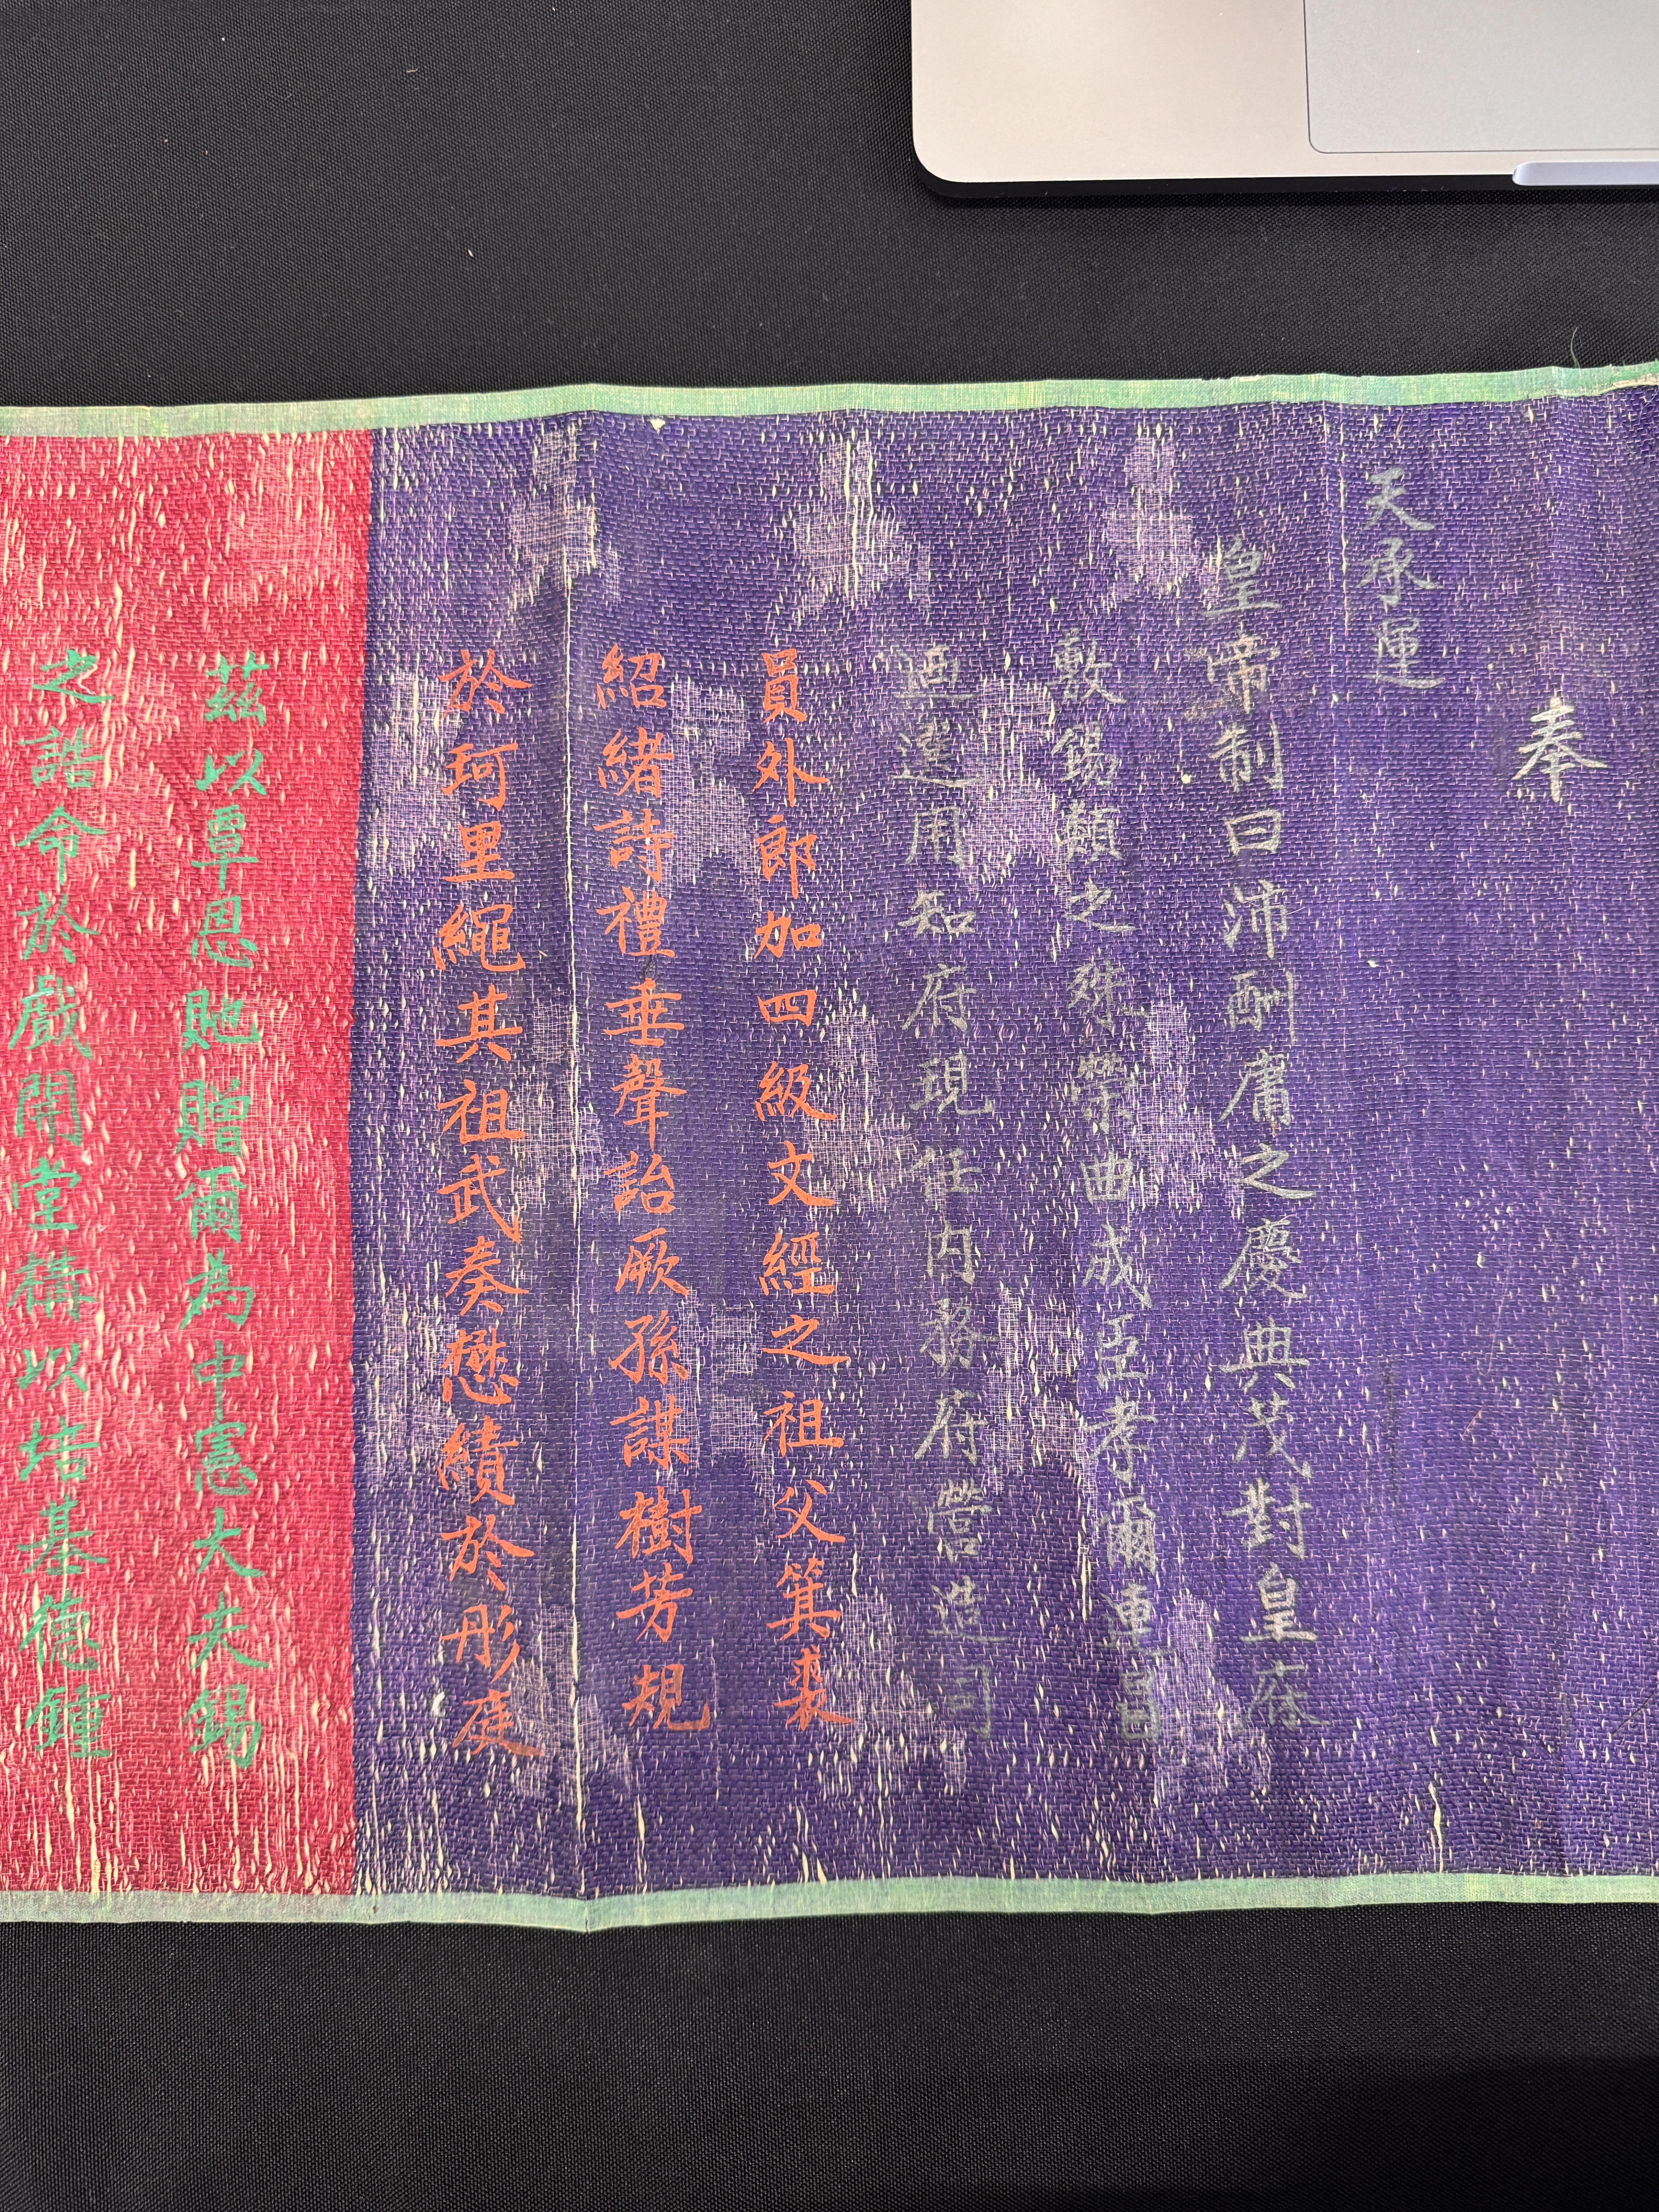 A CHINESE IMPERIAL EDICT HANDSCROLL 清光緒 1894年 世襲誥命文書 - Image 13 of 30